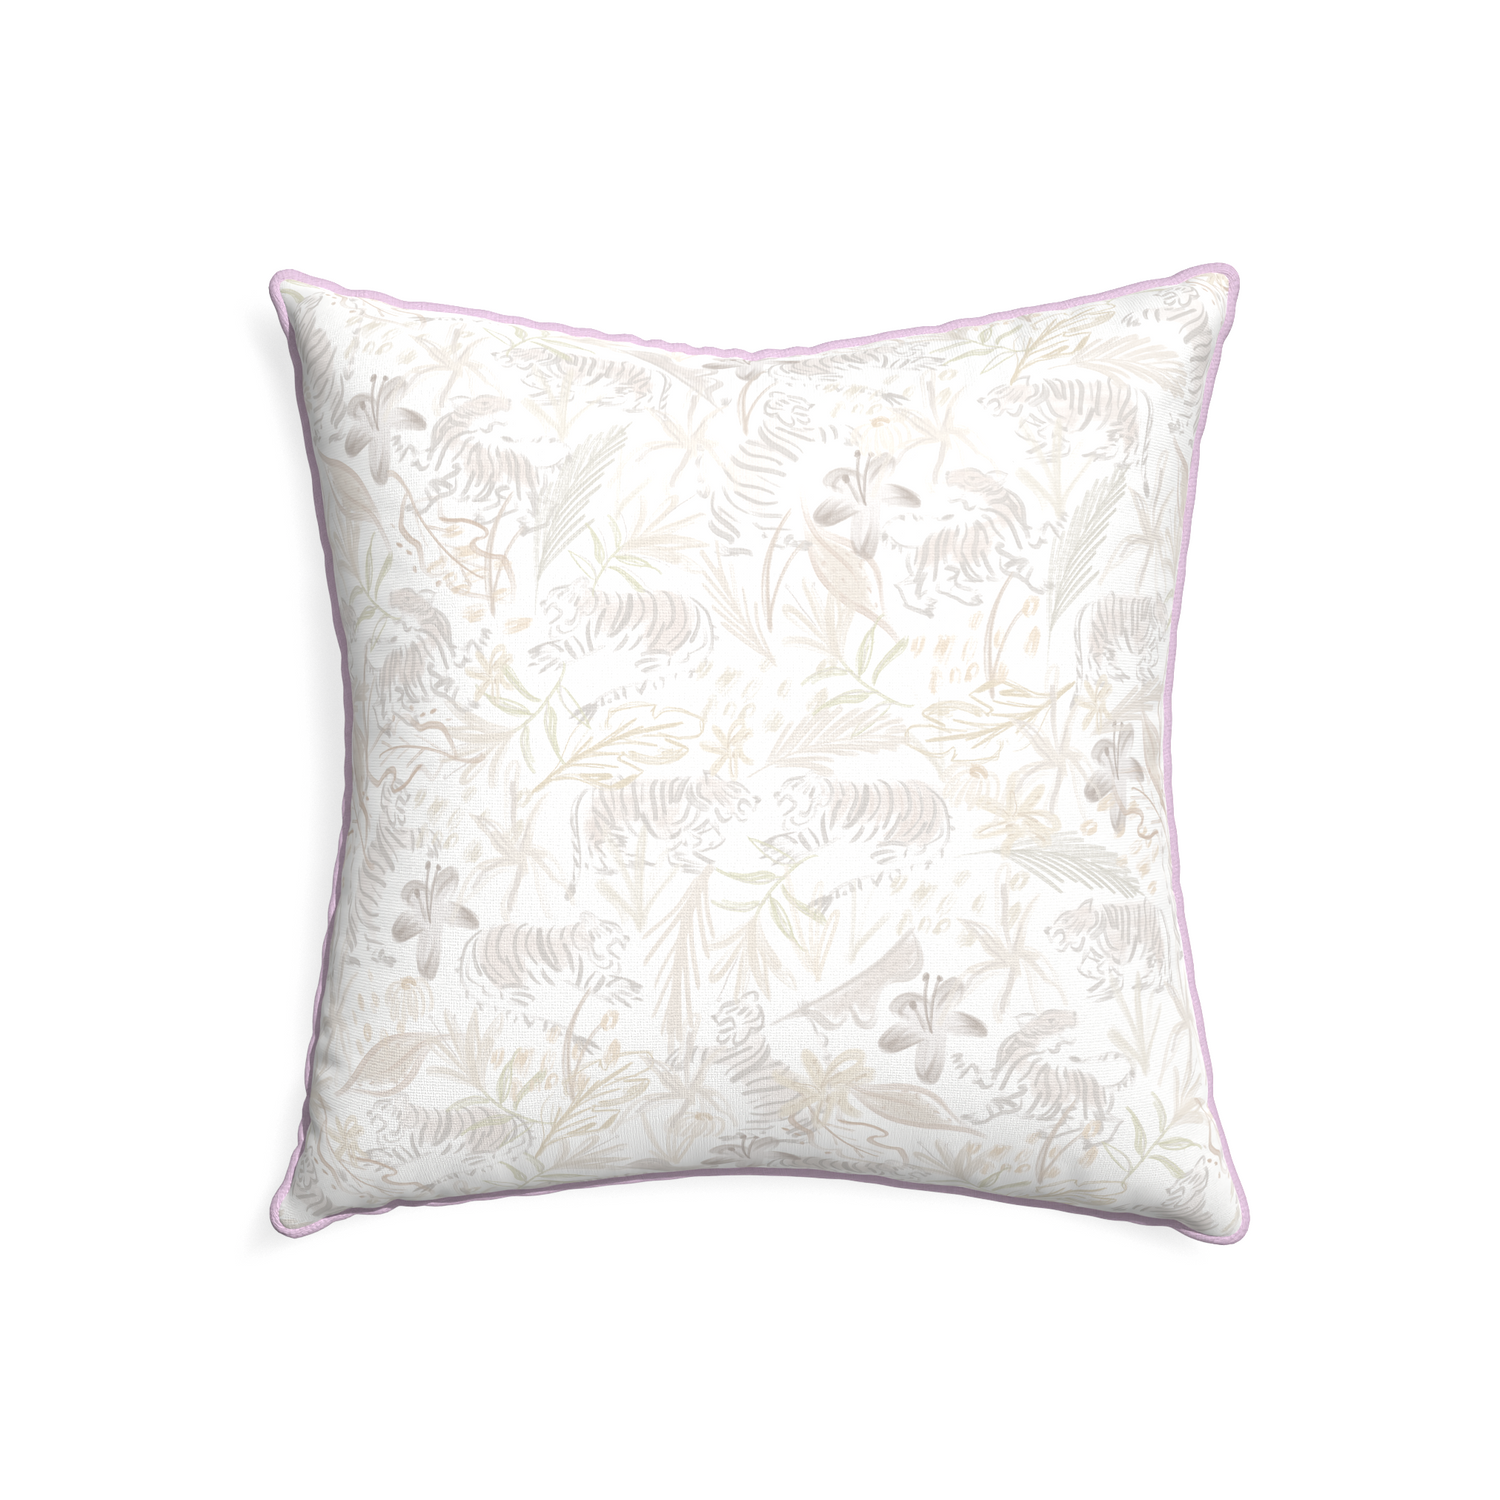 22-square frida sand custom beige chinoiserie tigerpillow with l piping on white background